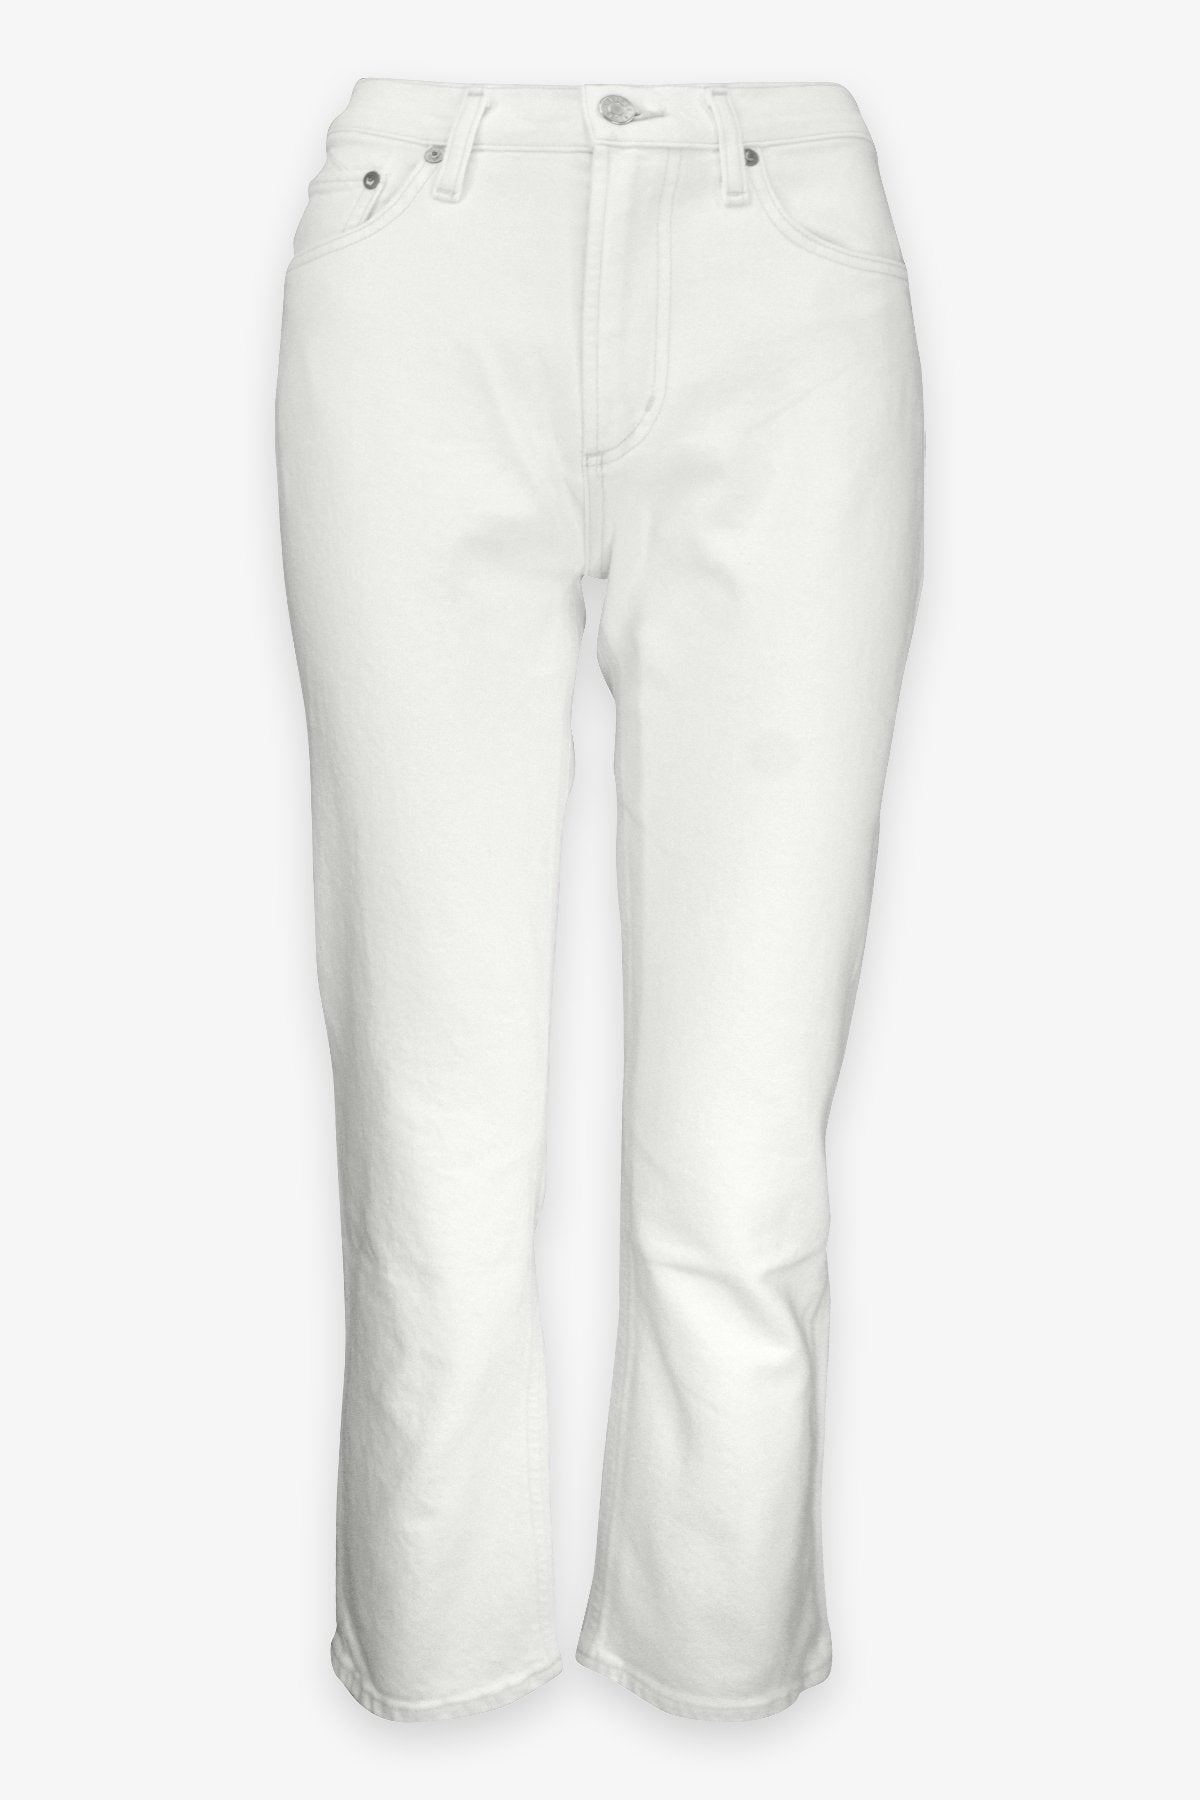 Wilder Jean Mid Rise Comfort Straight in Untitled - shop-olivia.com